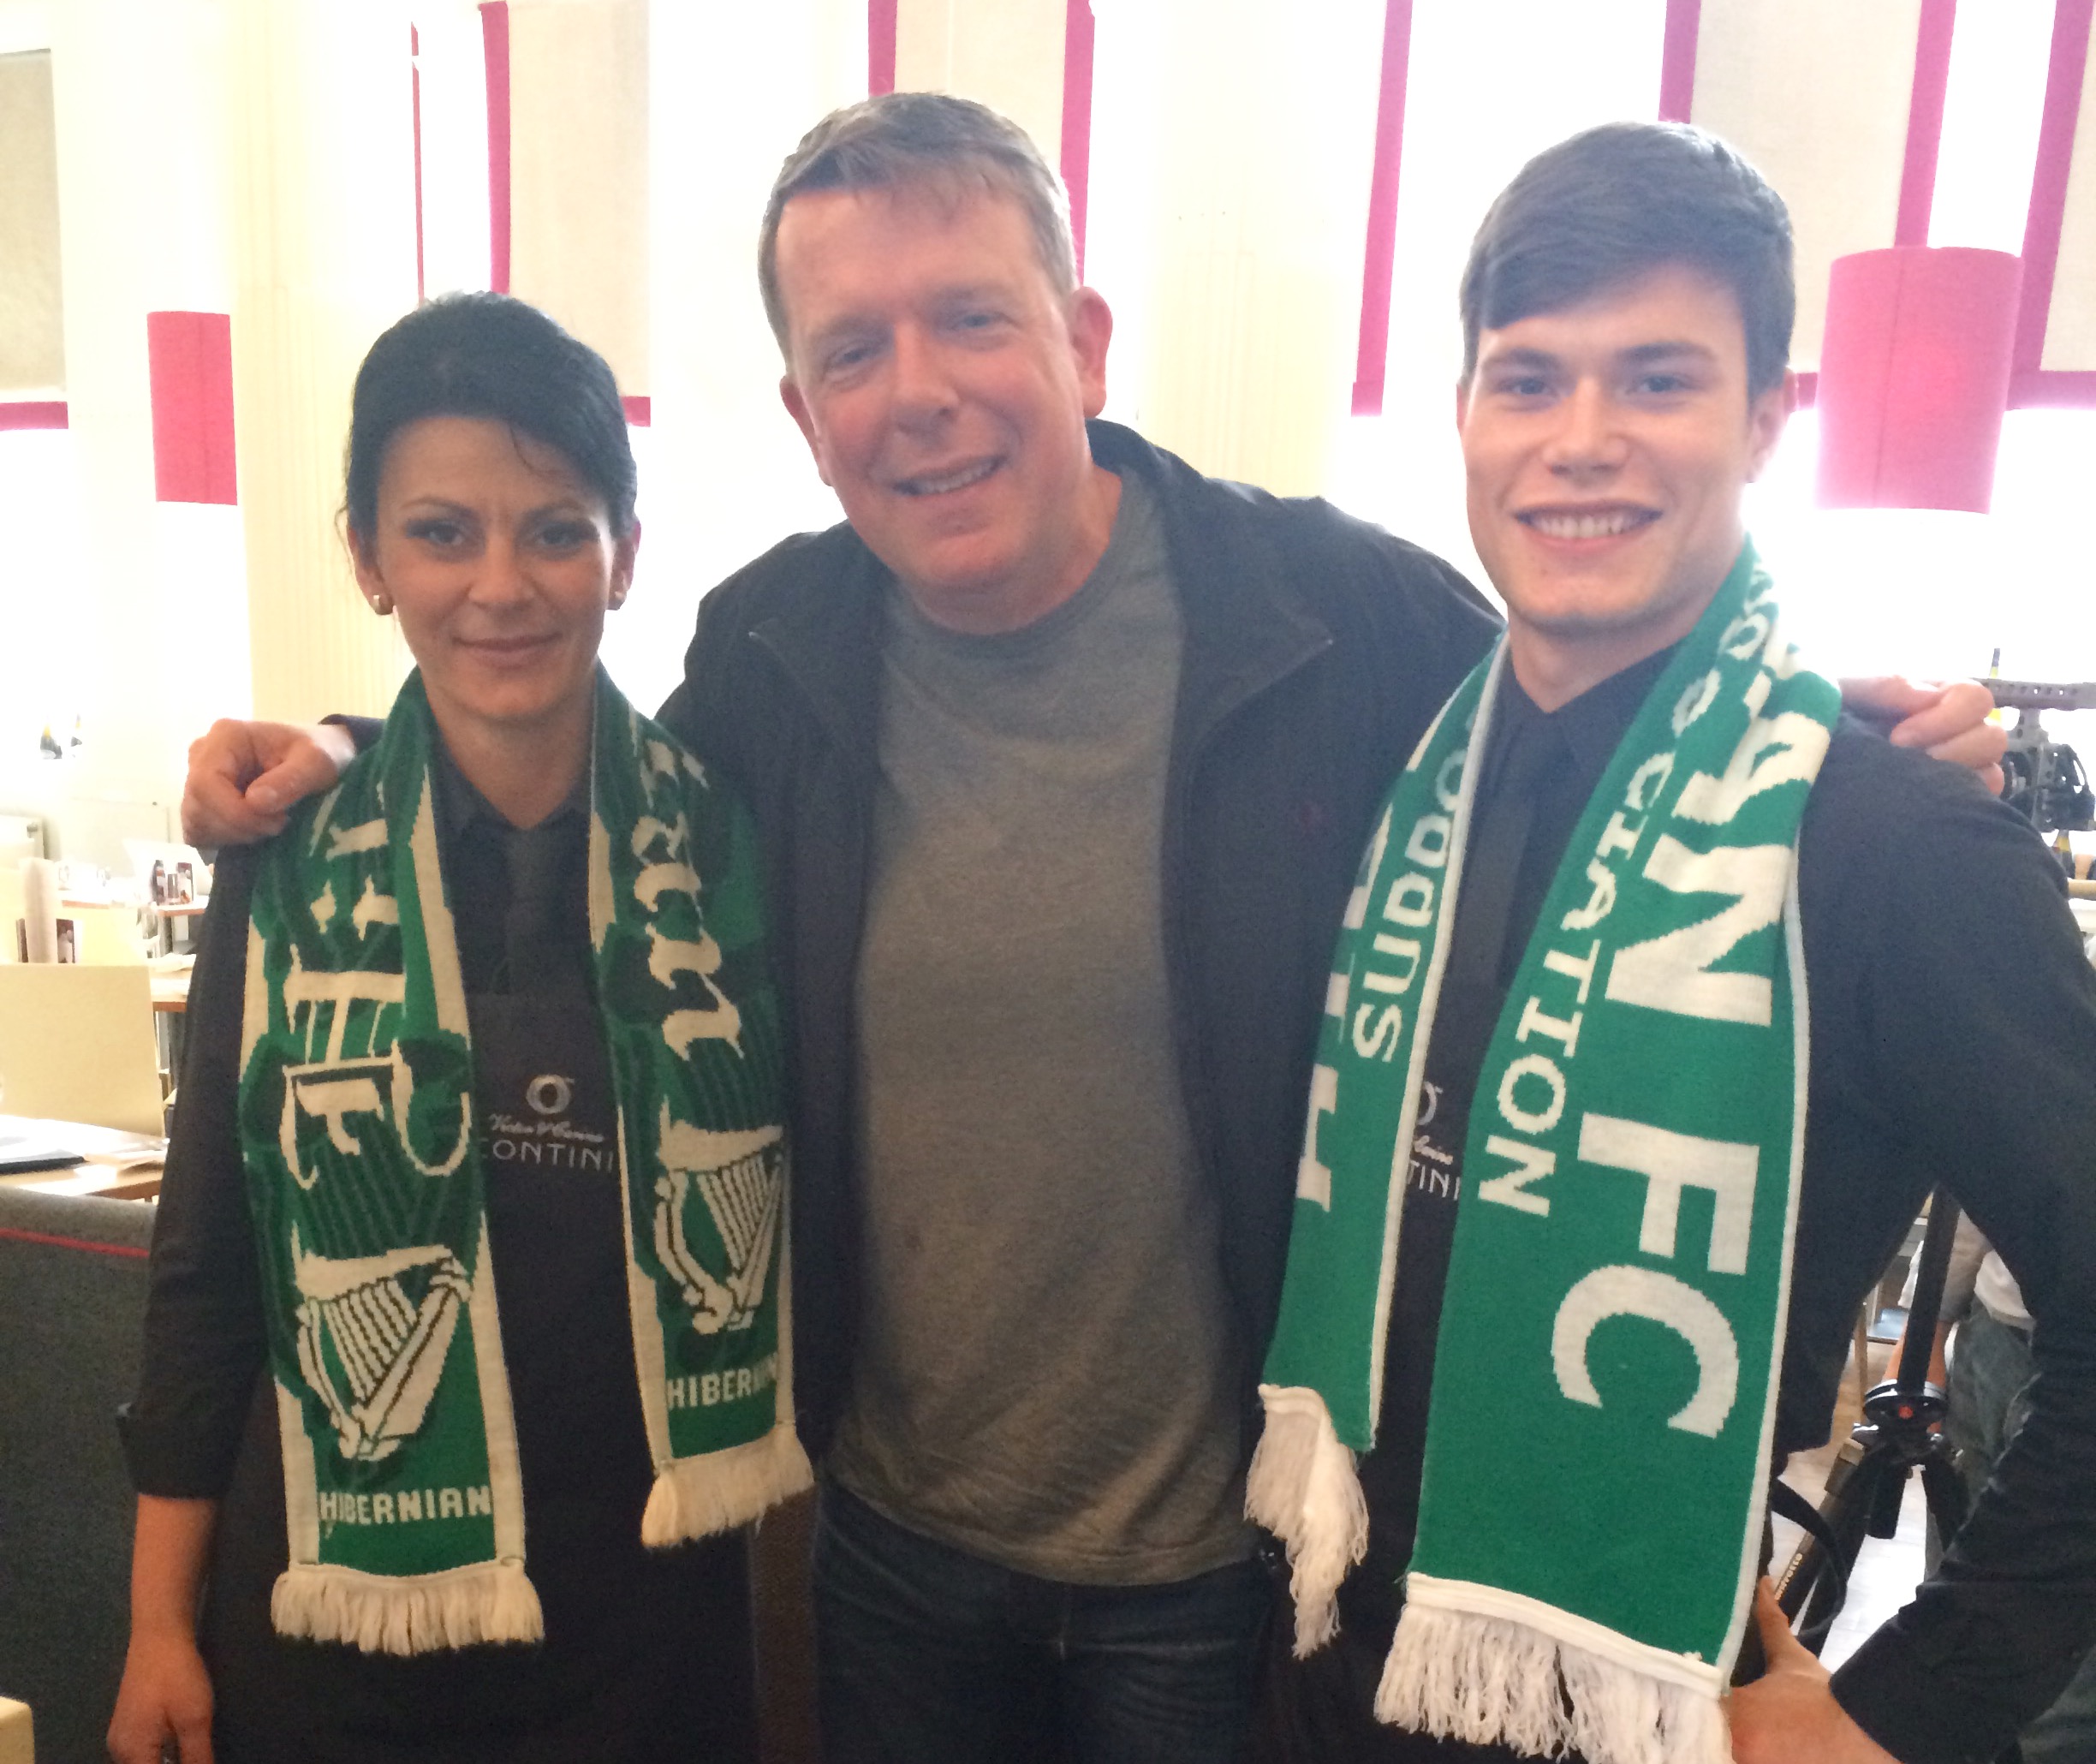 Charlie Reid talks about Hibs and HSL at Ristorante | Contini